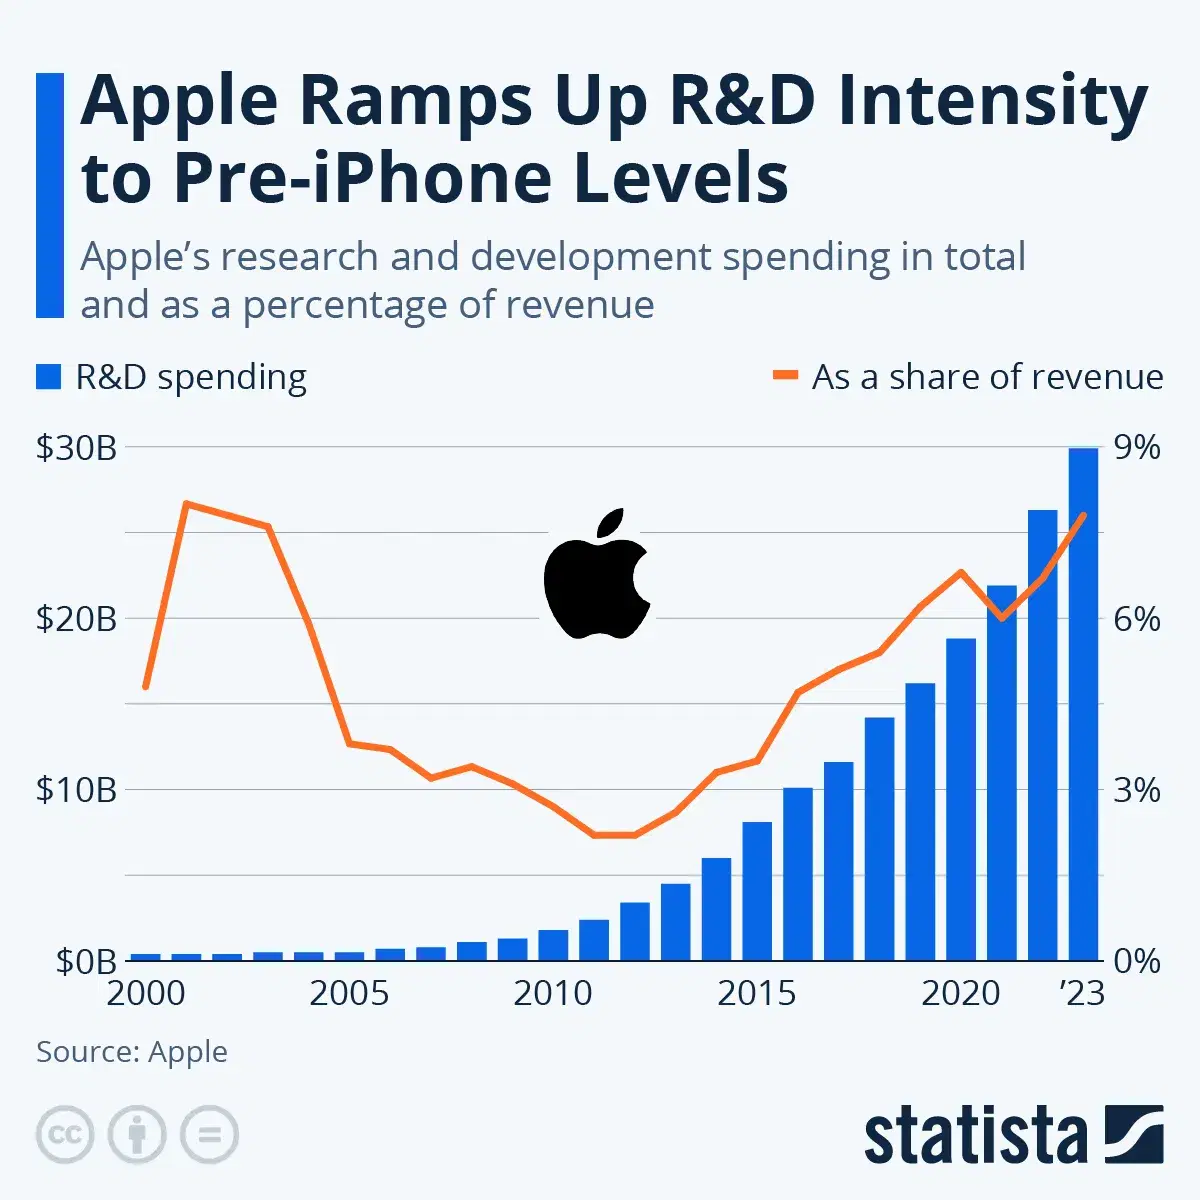 Apple Ramps Up R&D Intensity to Pre-iPhone Levels